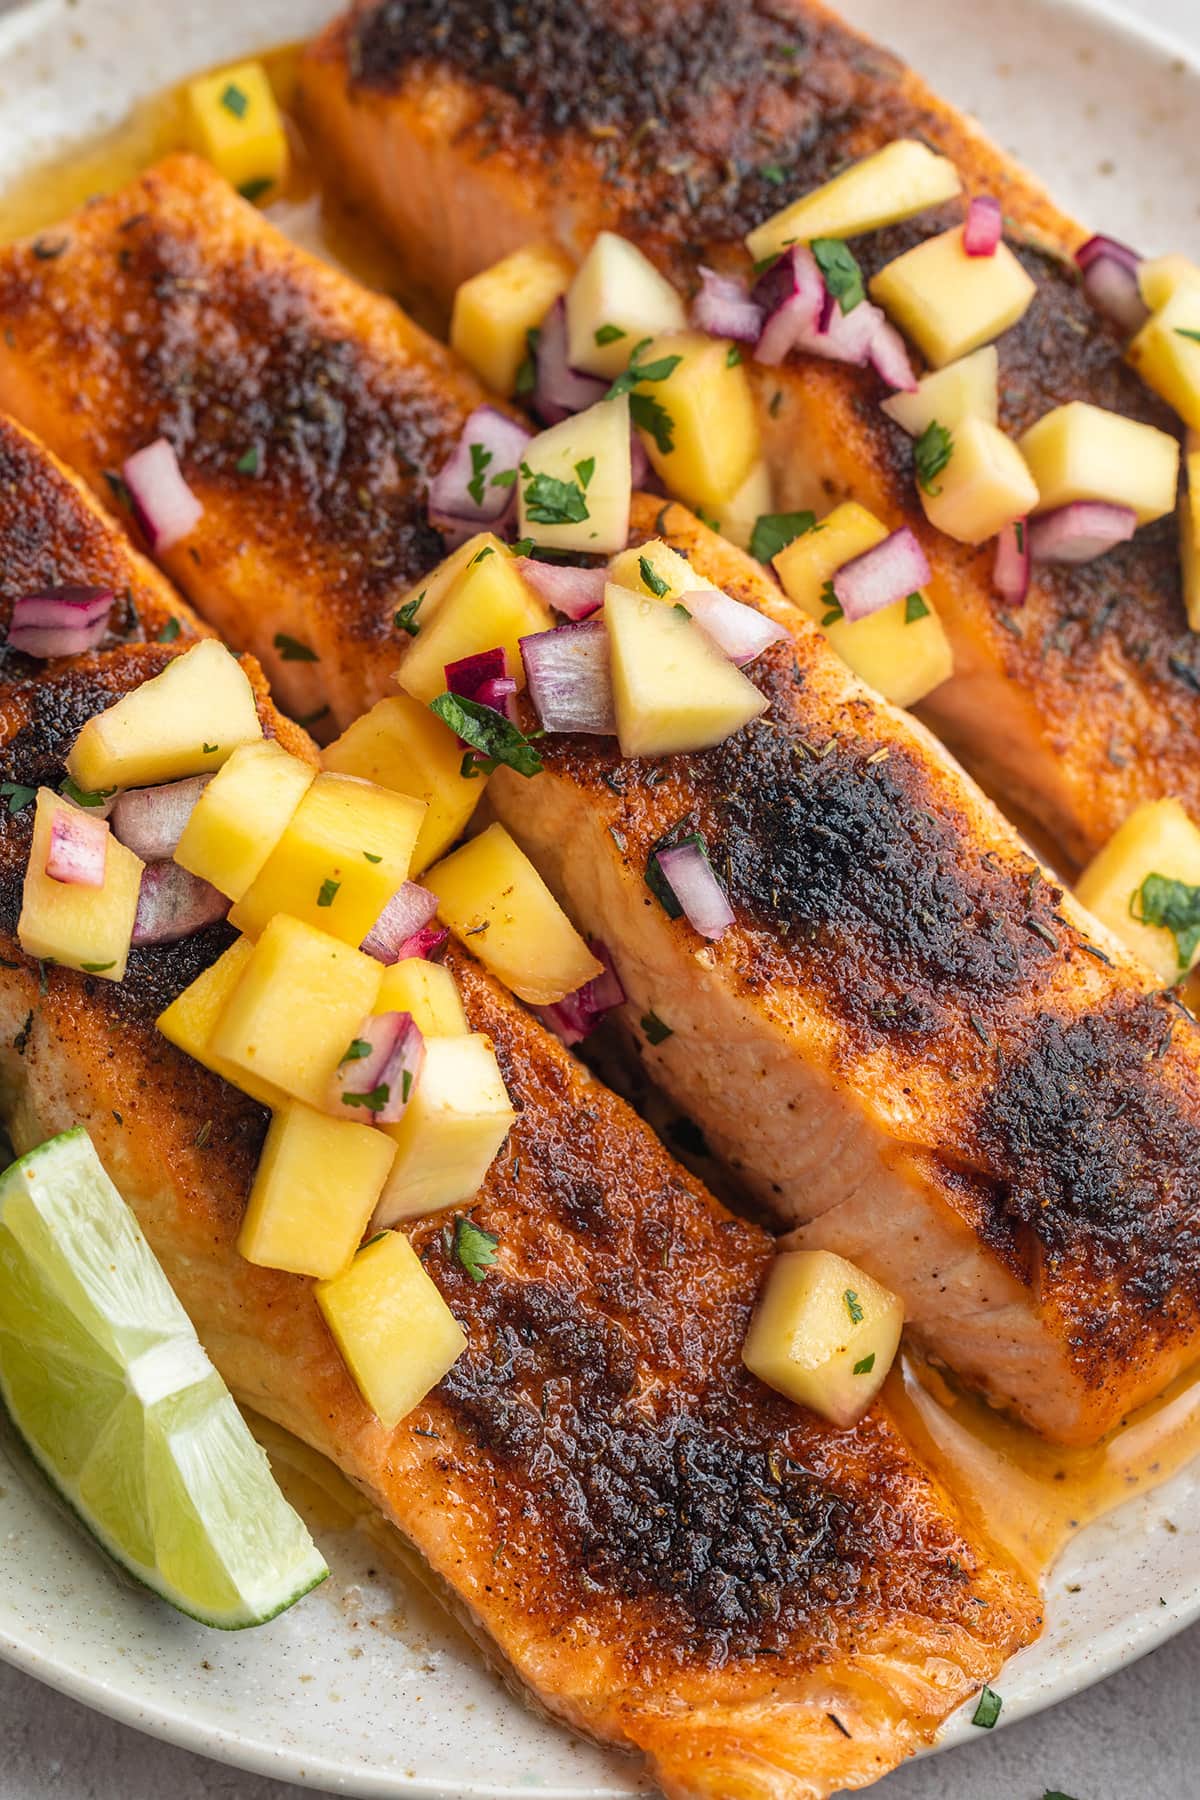 Three jerk salmon fillets topped with mango salsa on a round white plate.